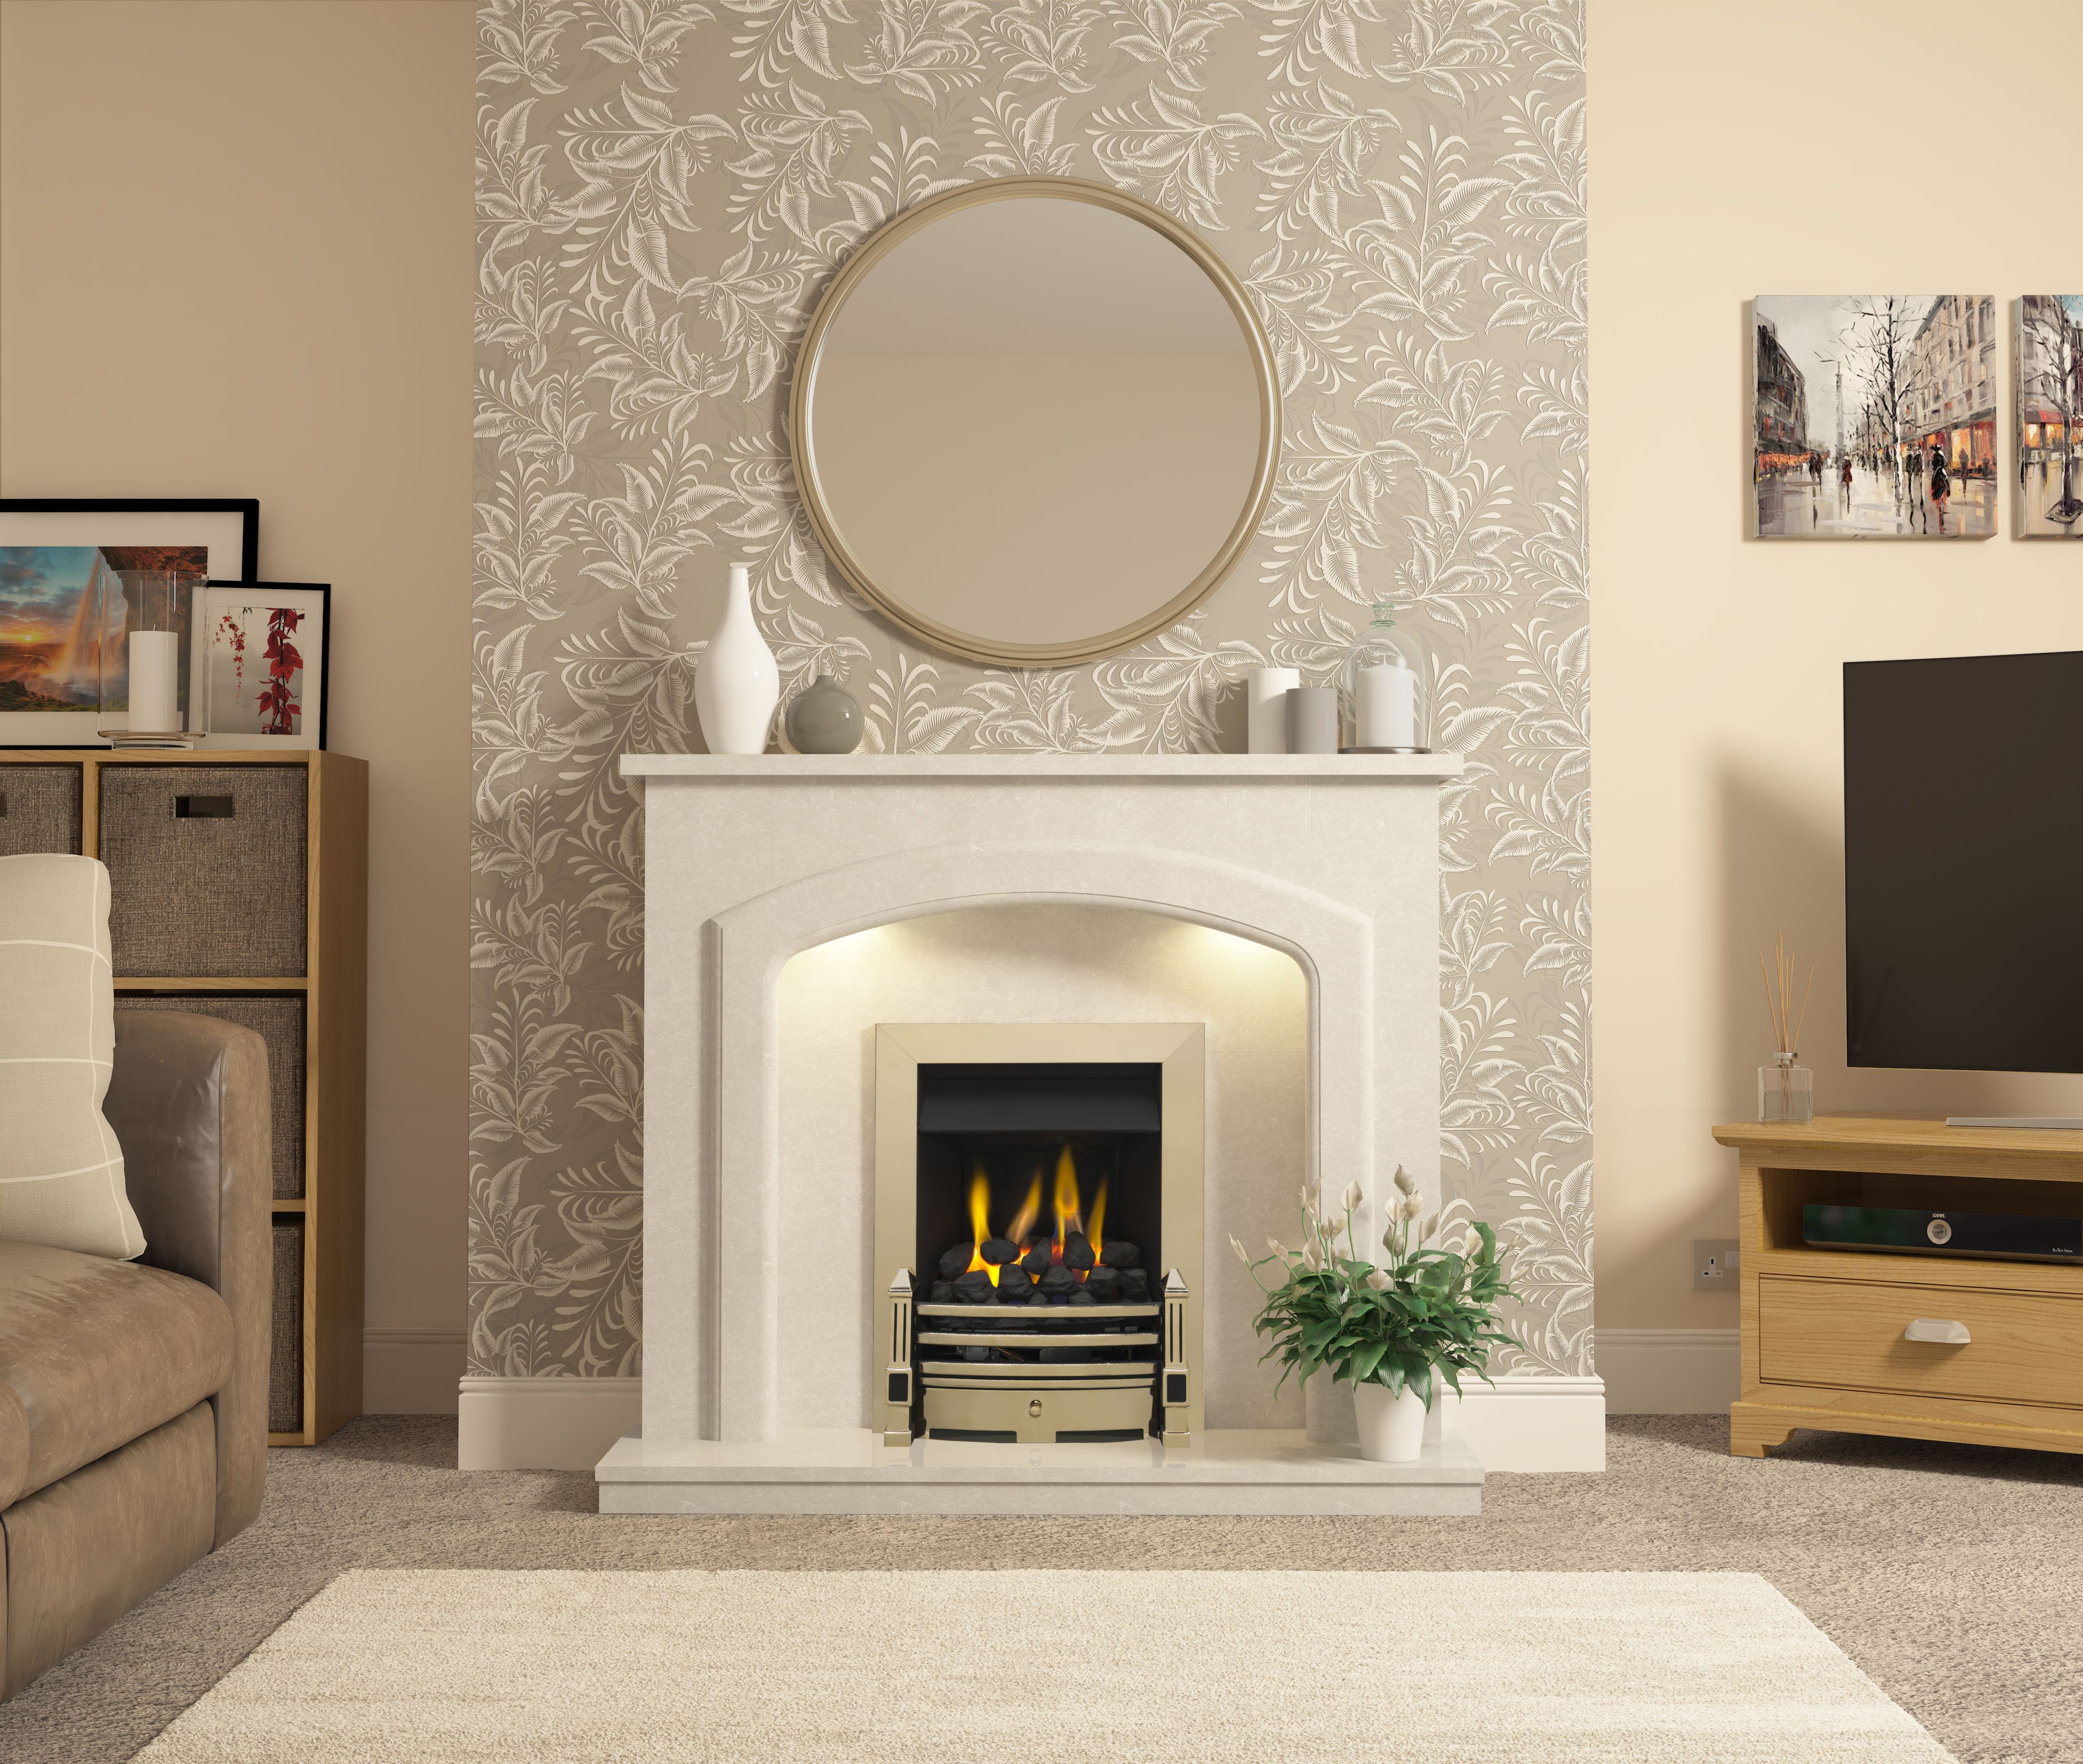 Be Modern Perlita Manila Fire surround set with Lights included